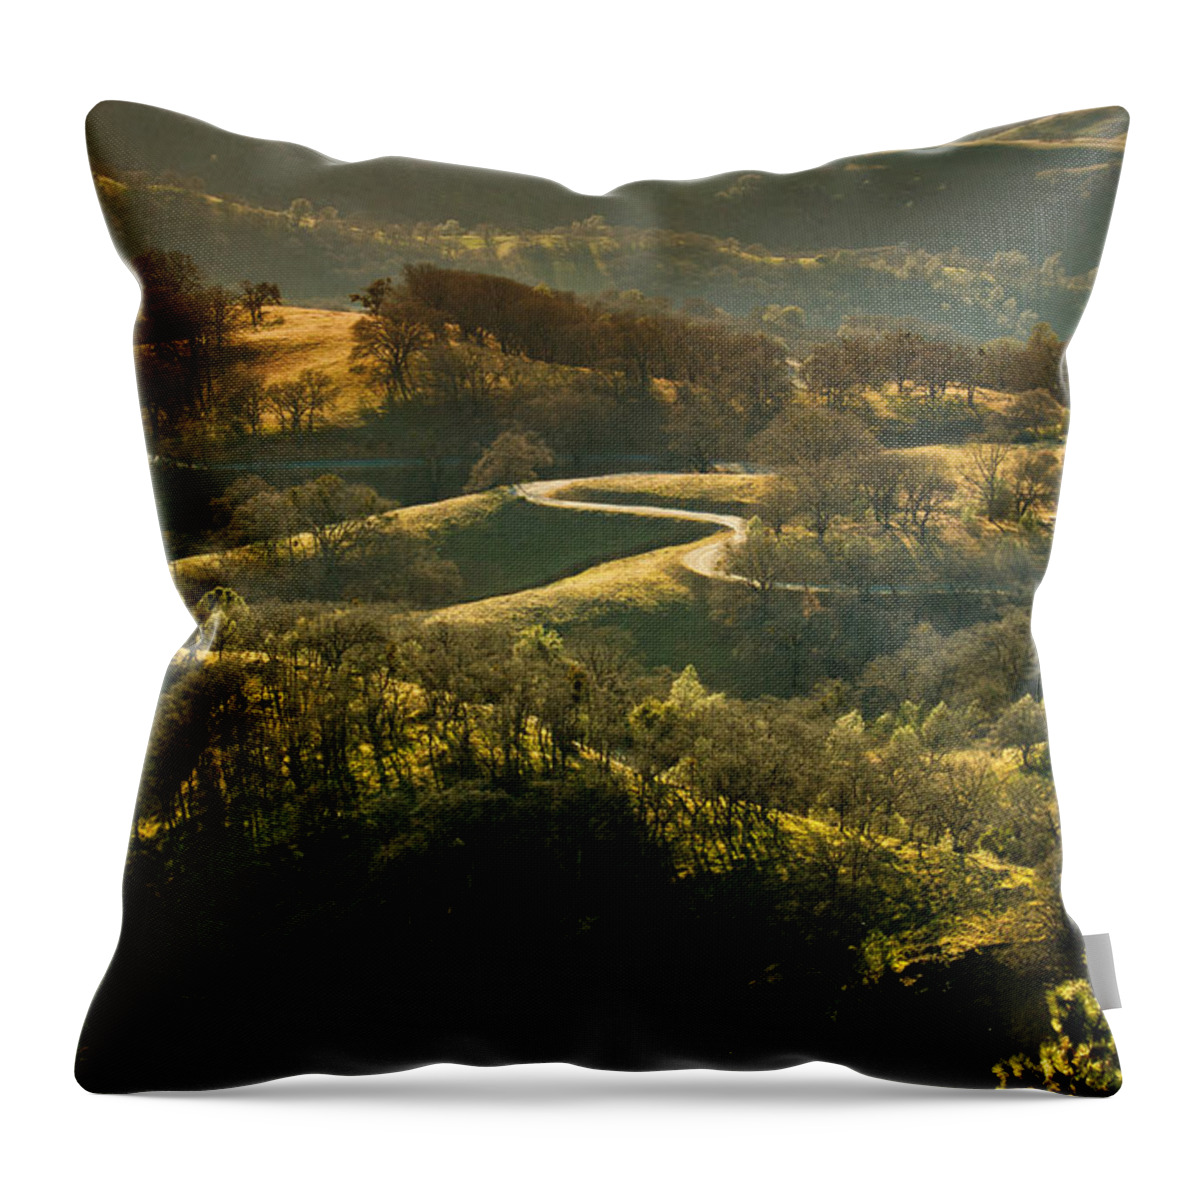 Mountain Road Throw Pillow featuring the photograph The Winding Road by Lisa Chorny